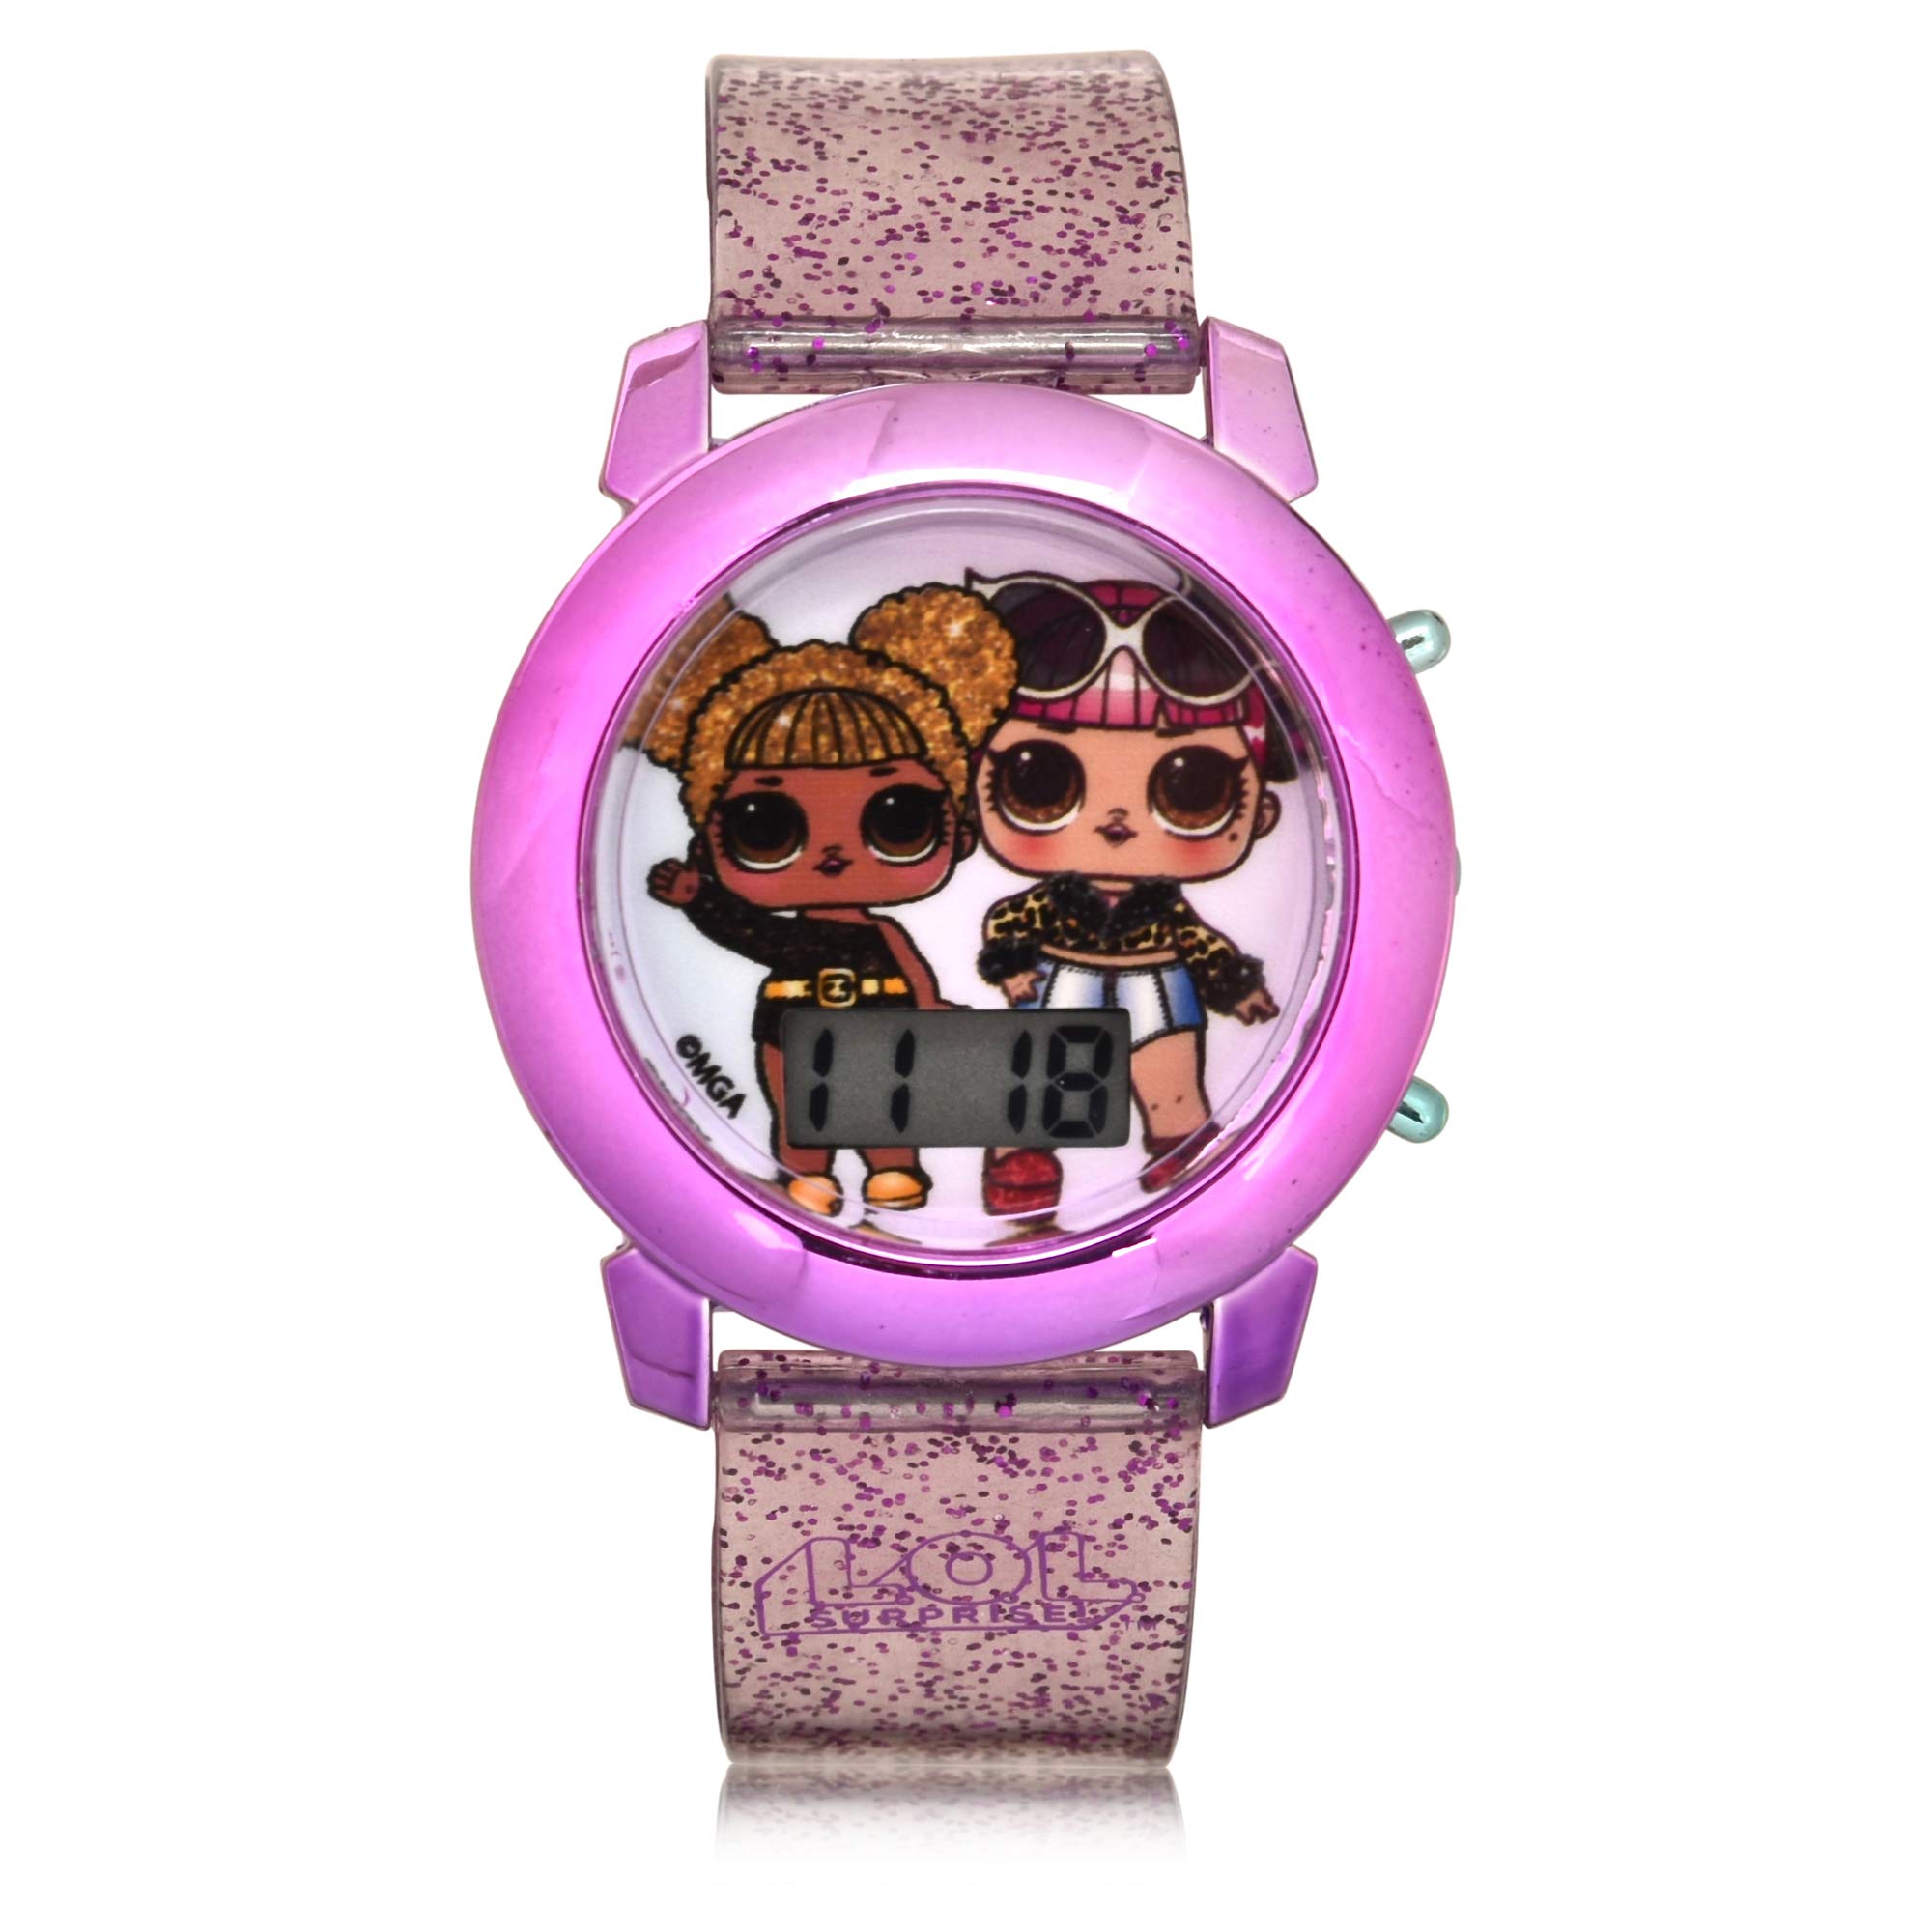 L.O.L Surprise! Kids' Watch with Flashing Led Lights - Kids Digital Watch with Official L.O.L Surprise! Characters On The Dial, Childrens Watch with Easy Buckle Strap, Kids Digital Watch, Safe For Children